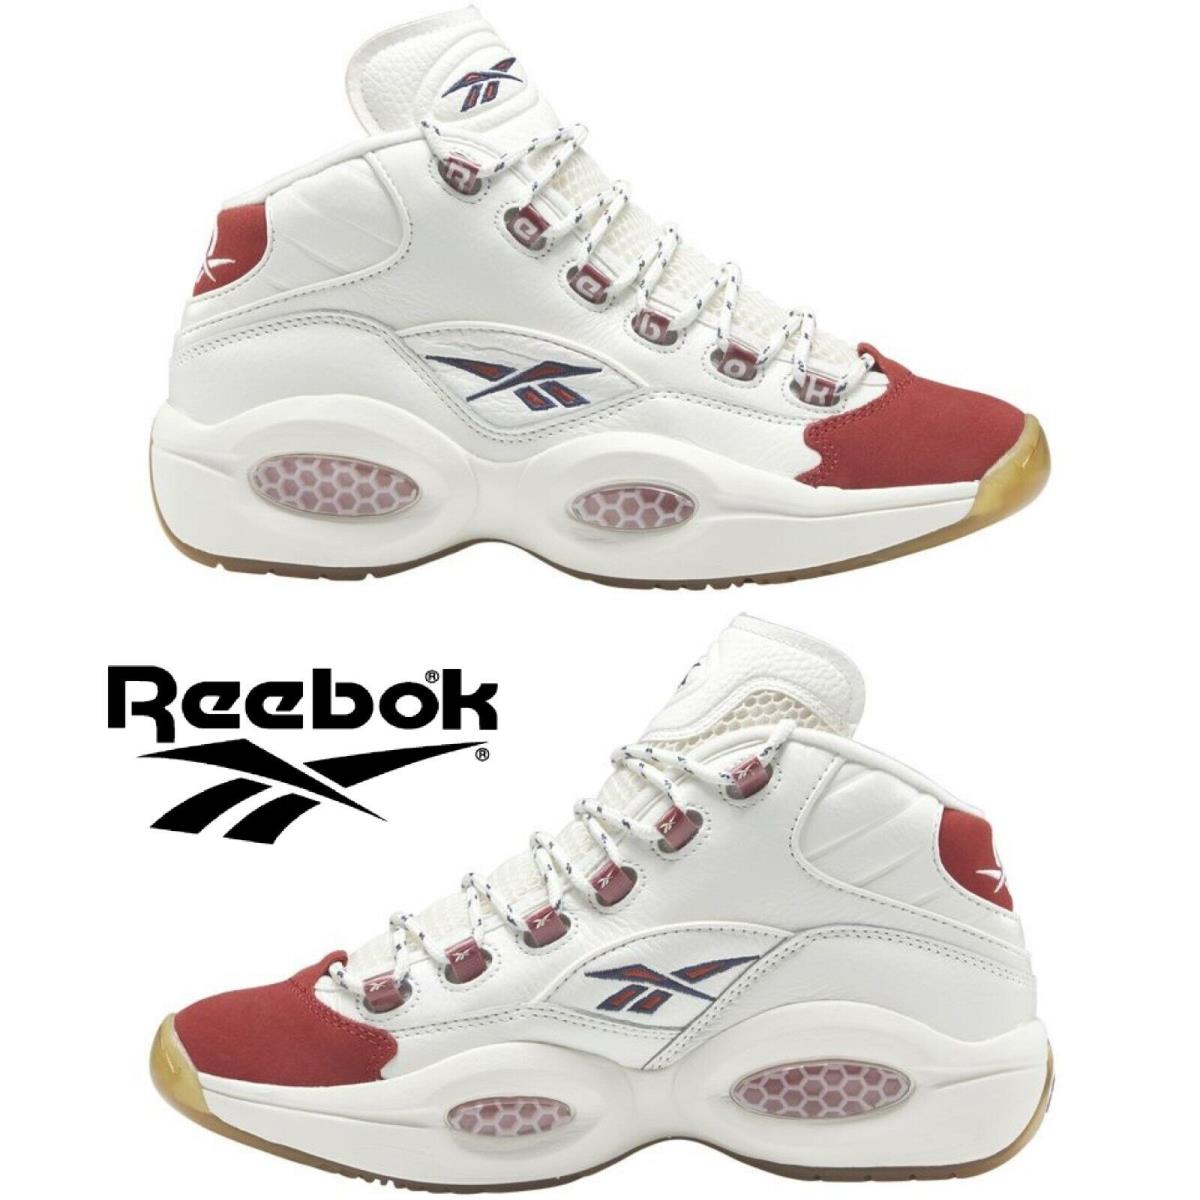 Reebok Question Mid Basketball Shoes Men`s Sneakers Running Casual Sport - White , White/Red Manufacturer